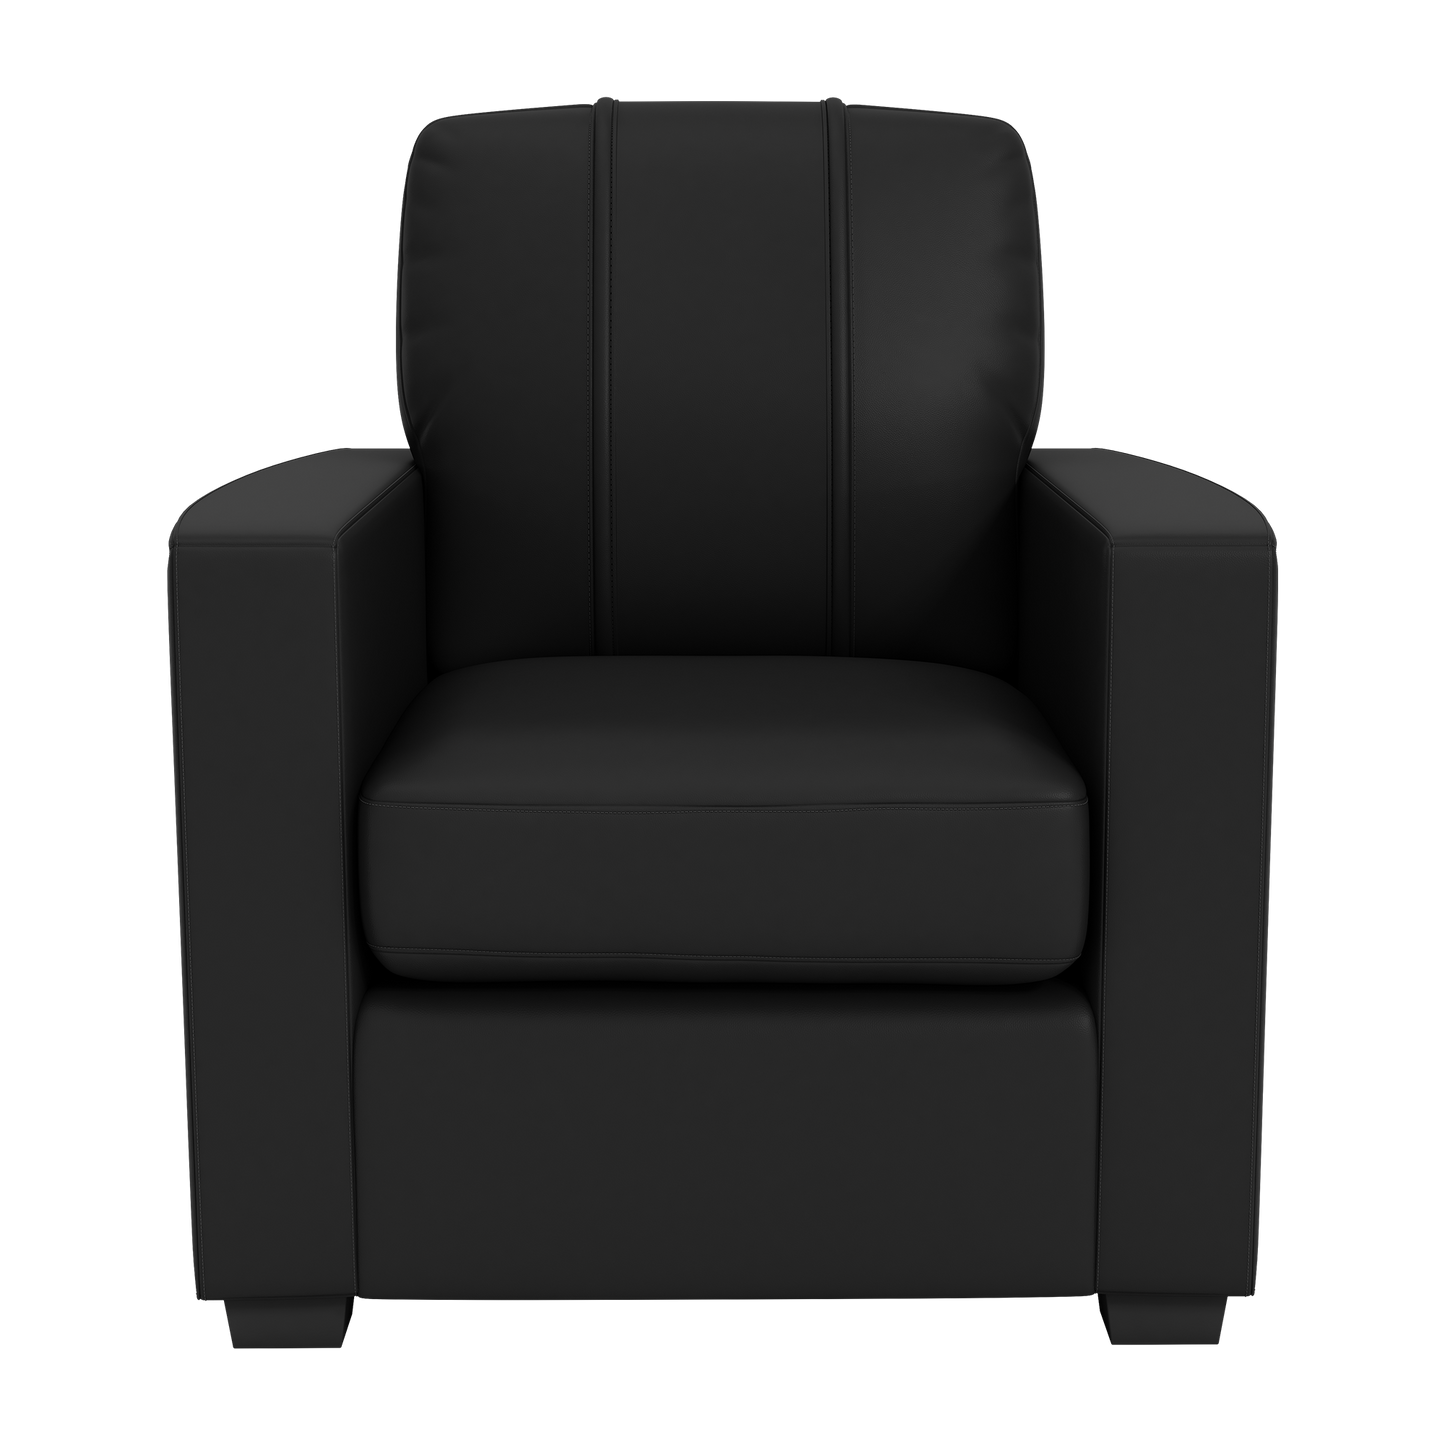 Silver Club Chair with  Carolina Panthers Helmet Logo